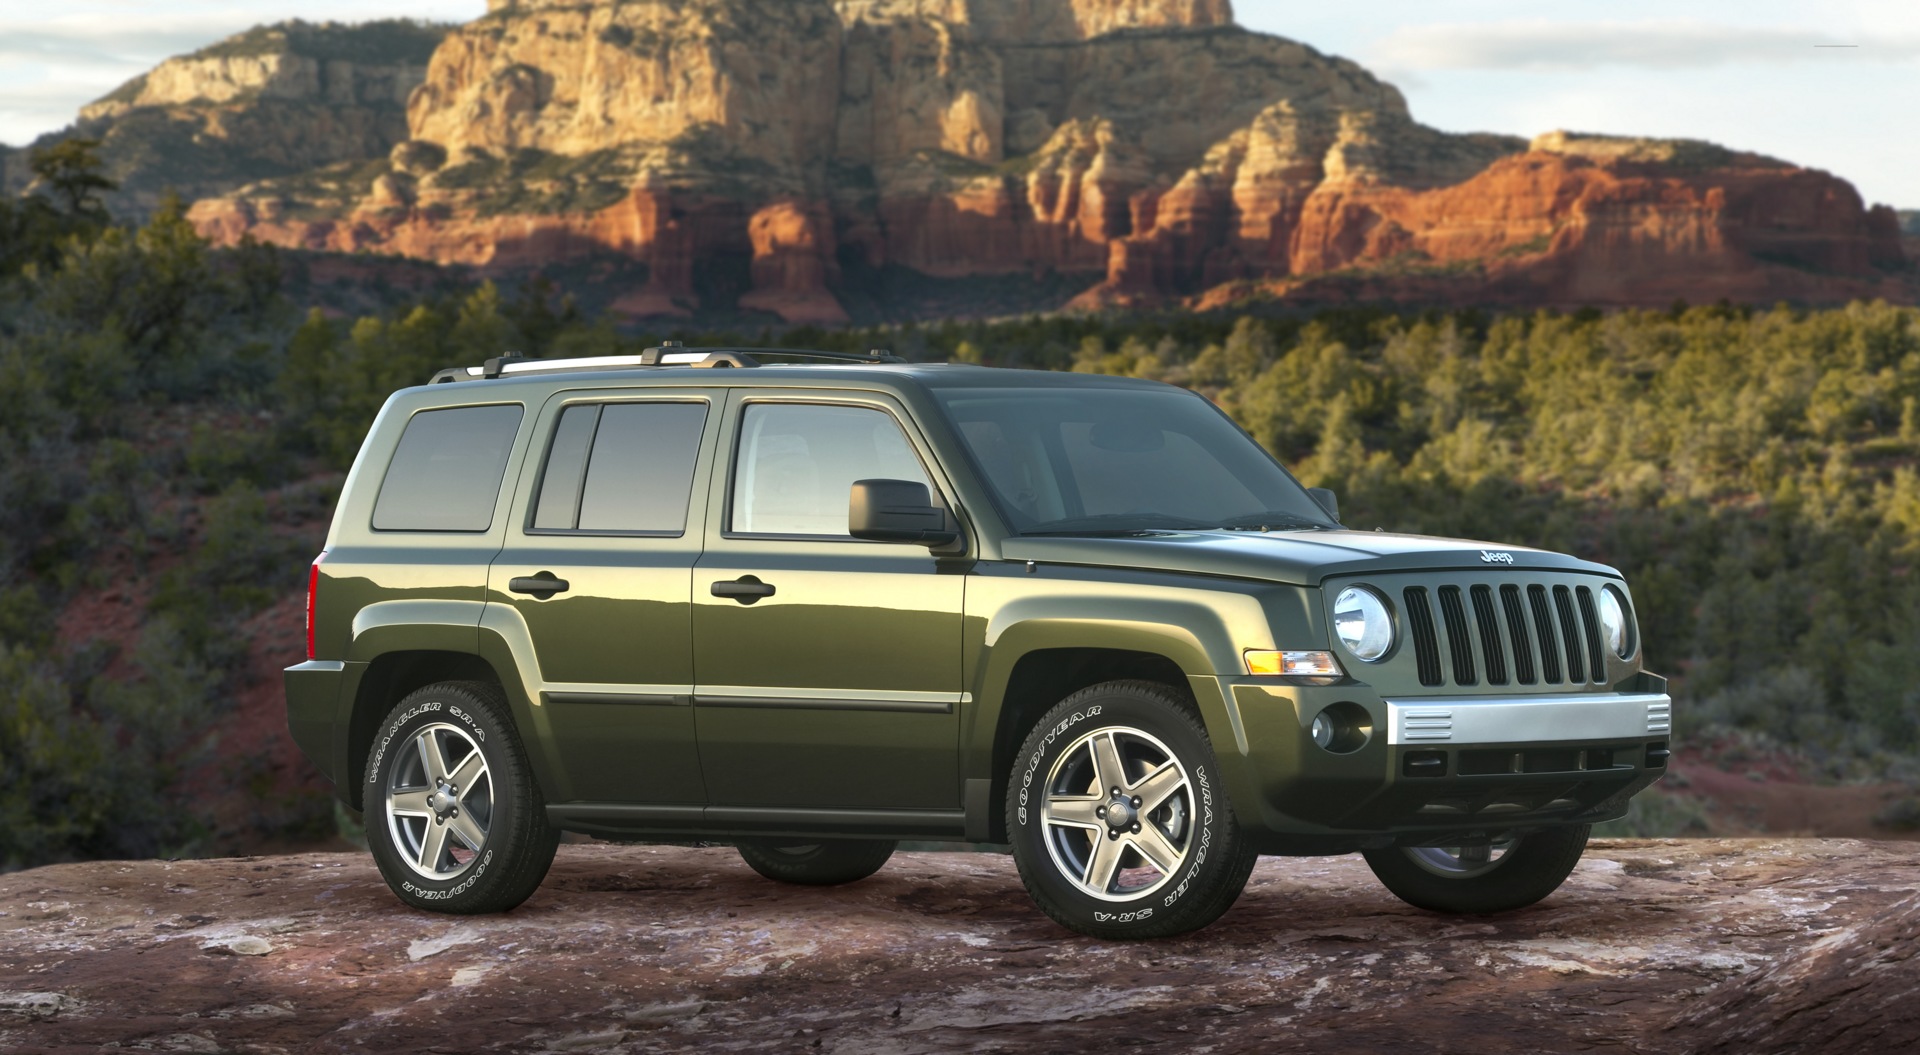 2008 Jeep Patriot News and Information